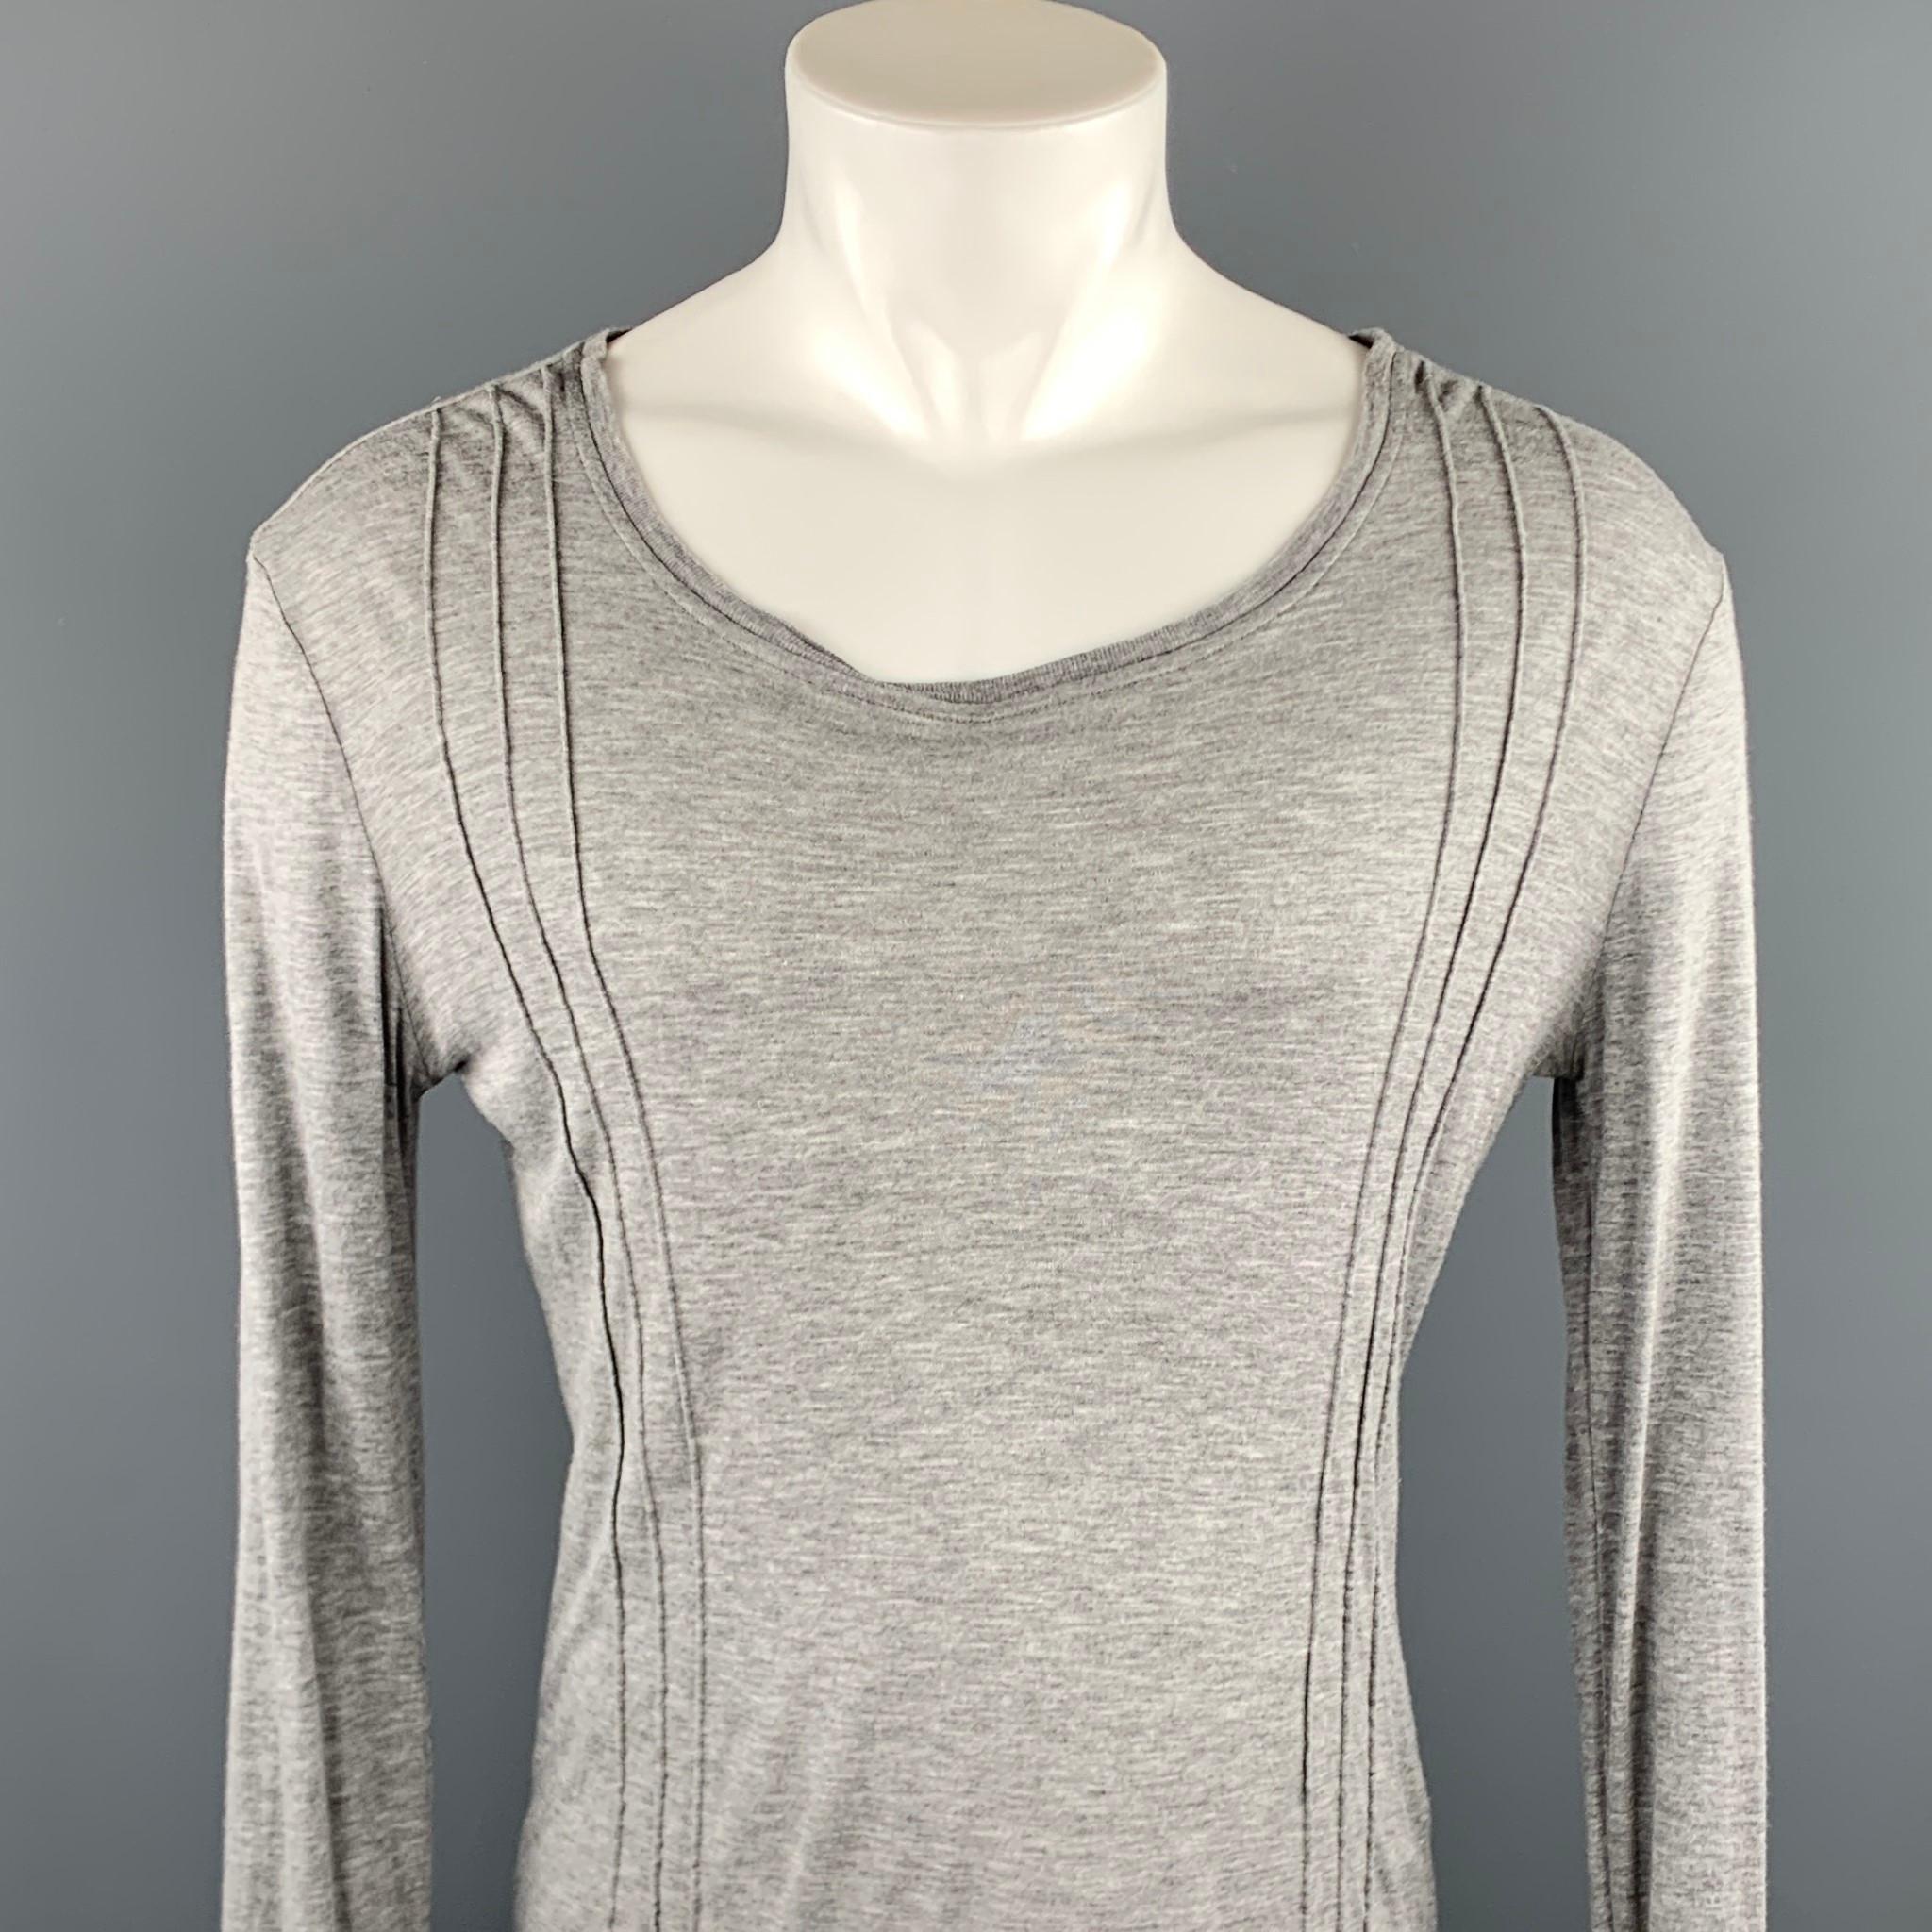 VERSACE JEANS COUTURE pullover comes in a gray modal featuring pleated details and a scoop neck. Made in Italy.

Excellent Pre-Owned Condition.
Marked: IT 48

Measurements:

Shoulder: 21.5 in. 
Chest: 42 in. 
Sleeve: 26.5 in.
Length: 24 in. 